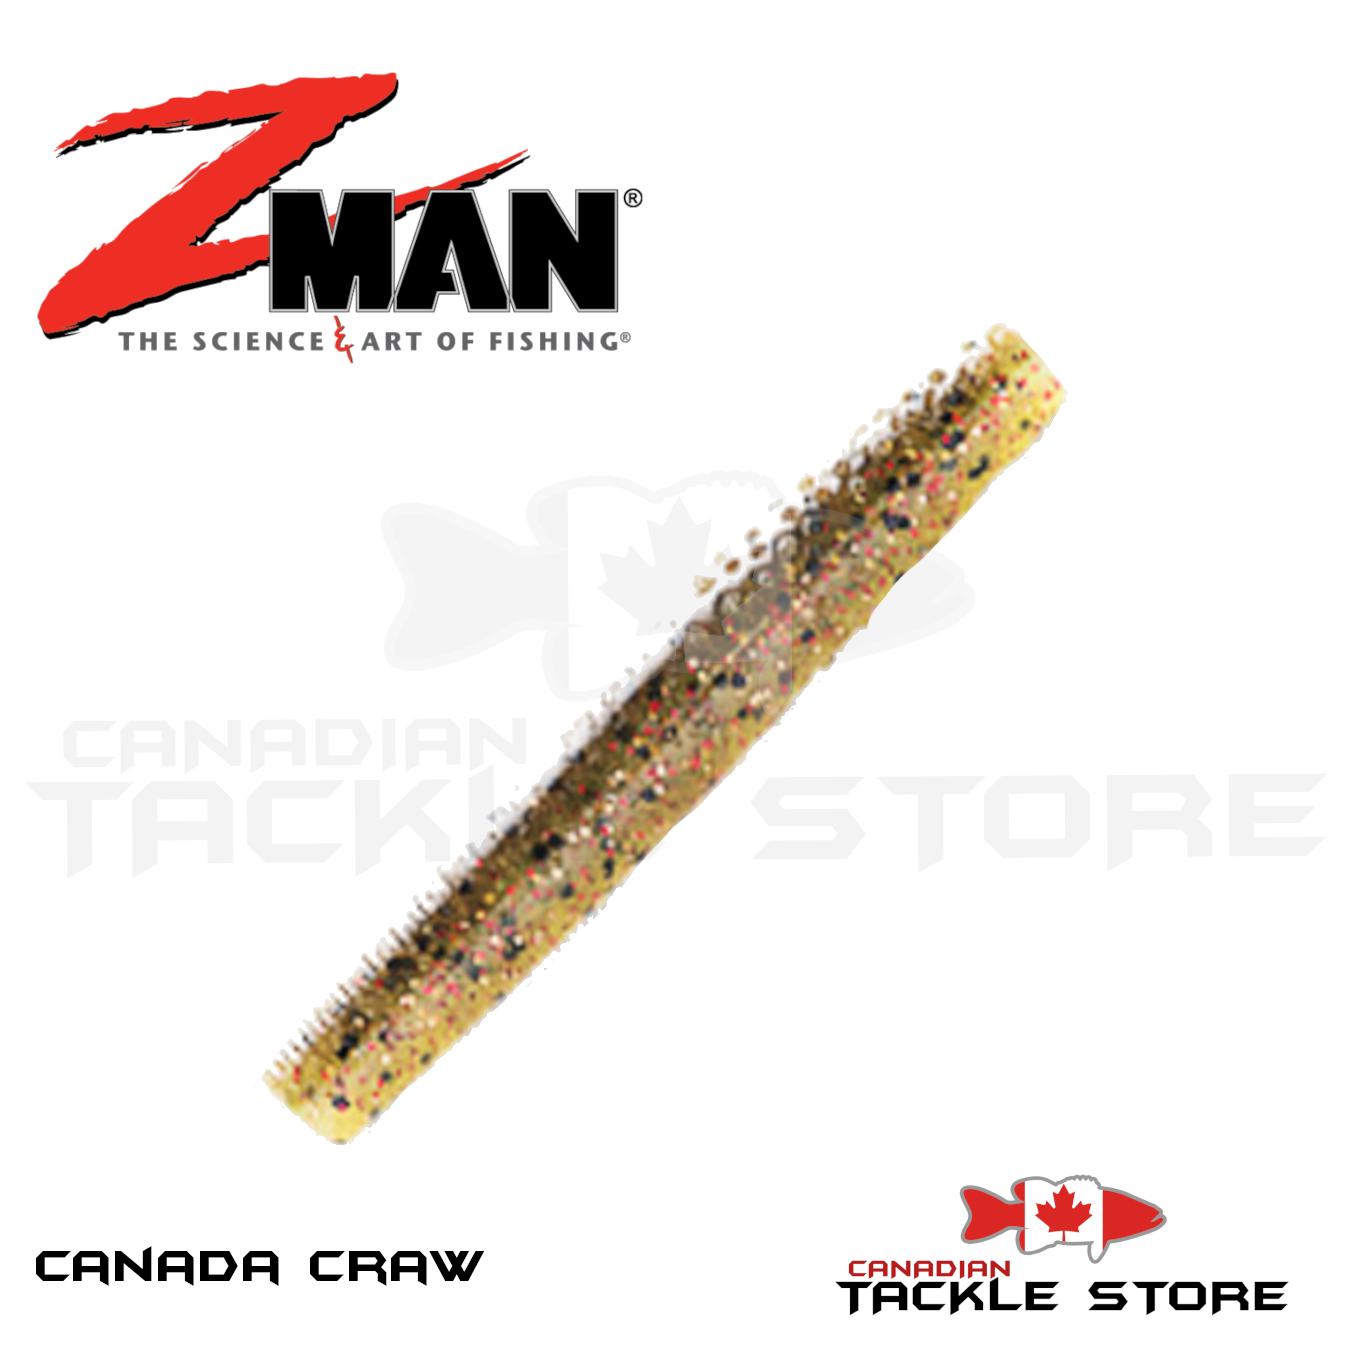 Z-Man Finesse TRD – Canadian Tackle Store